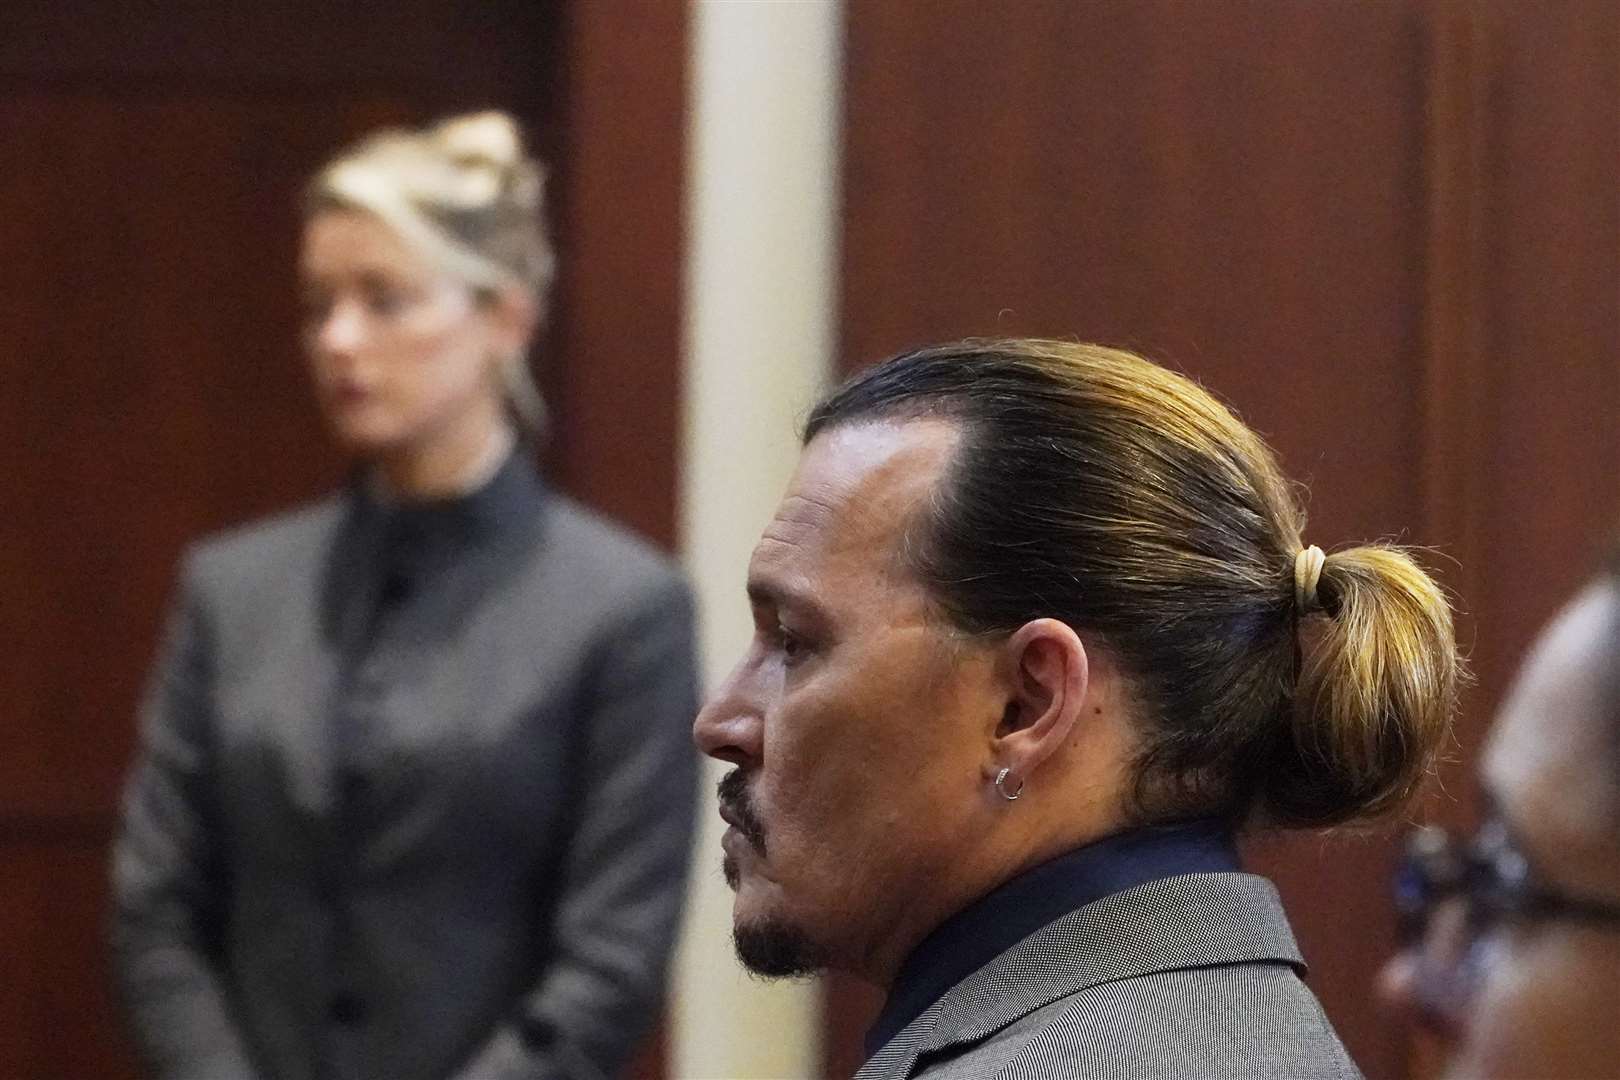 The jury was shown photographs in which Ms Heard appeared to have marks on her arms, which she said were scars caused by Mr Depp (Steve Heber/AP)